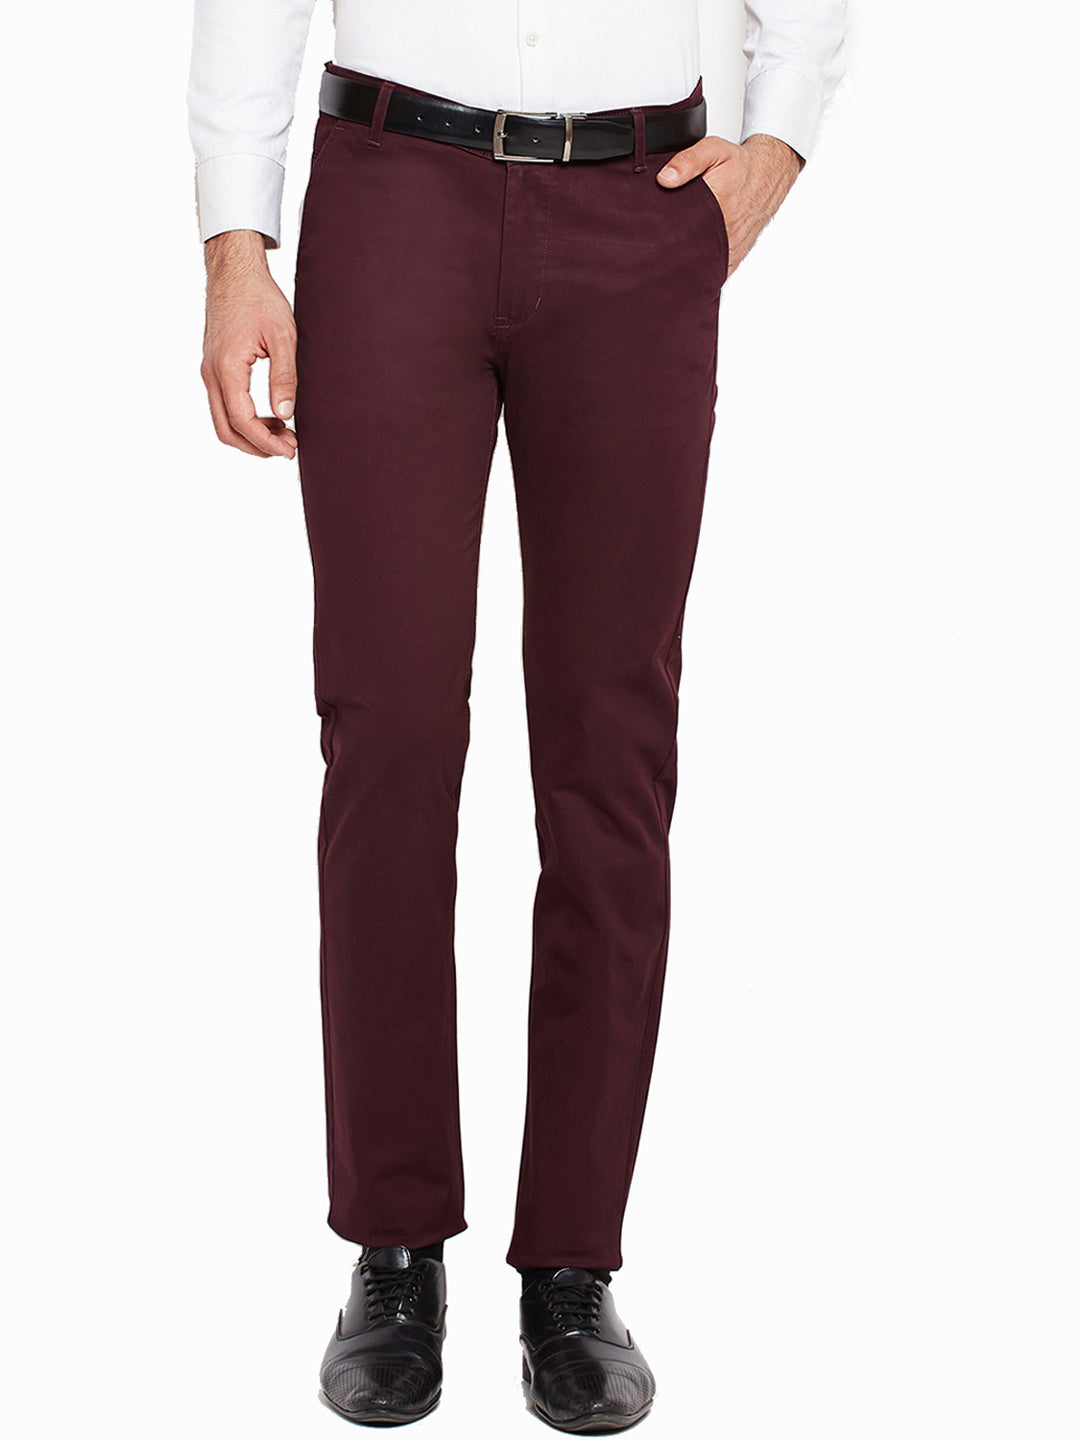 Men Wine Self Design Solid Stretchable Mid Rise Slim Fit Chinos Trouser